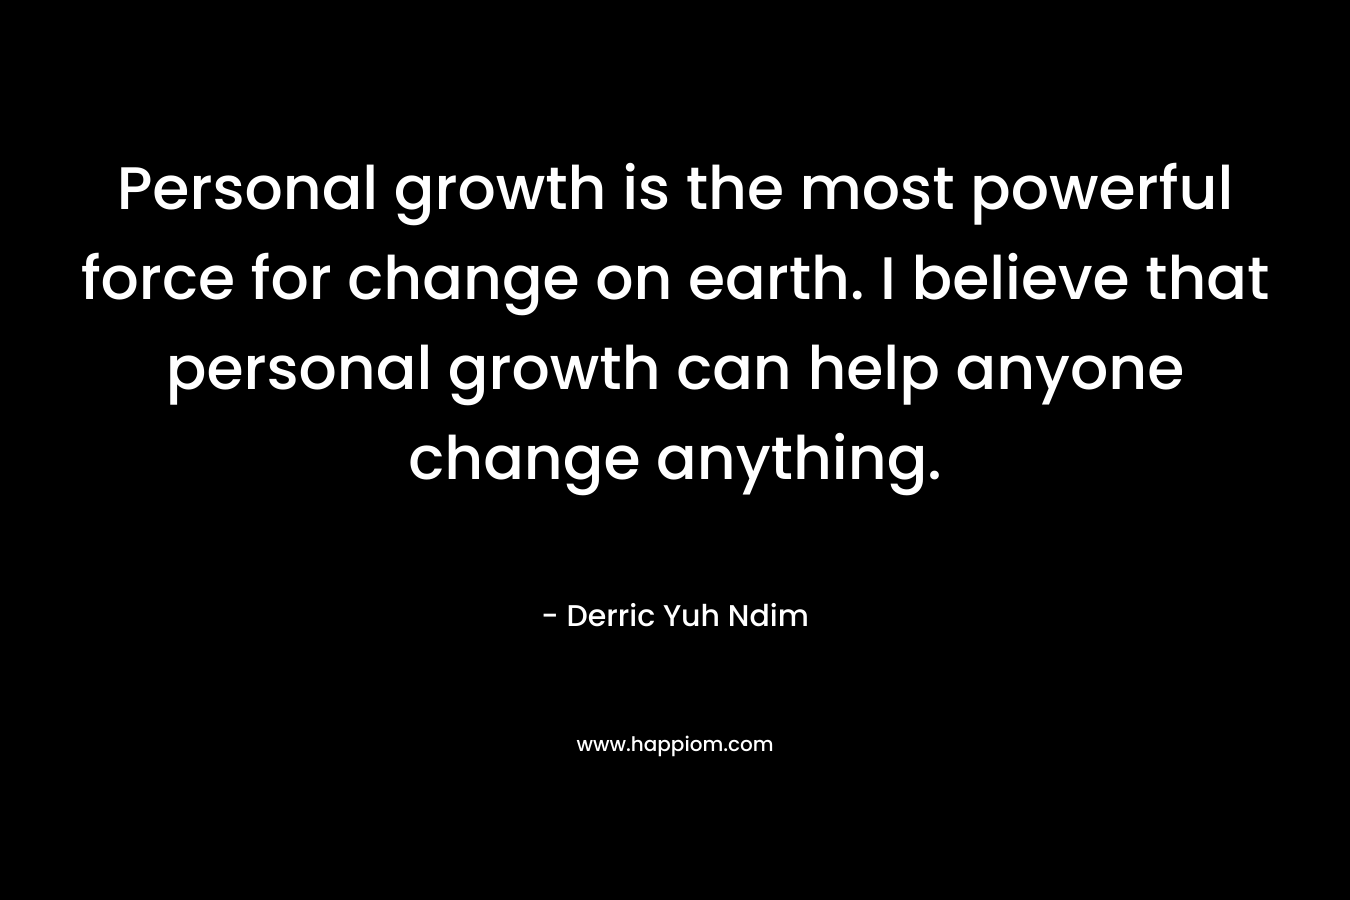 Personal growth is the most powerful force for change on earth. I believe that personal growth can help anyone change anything.